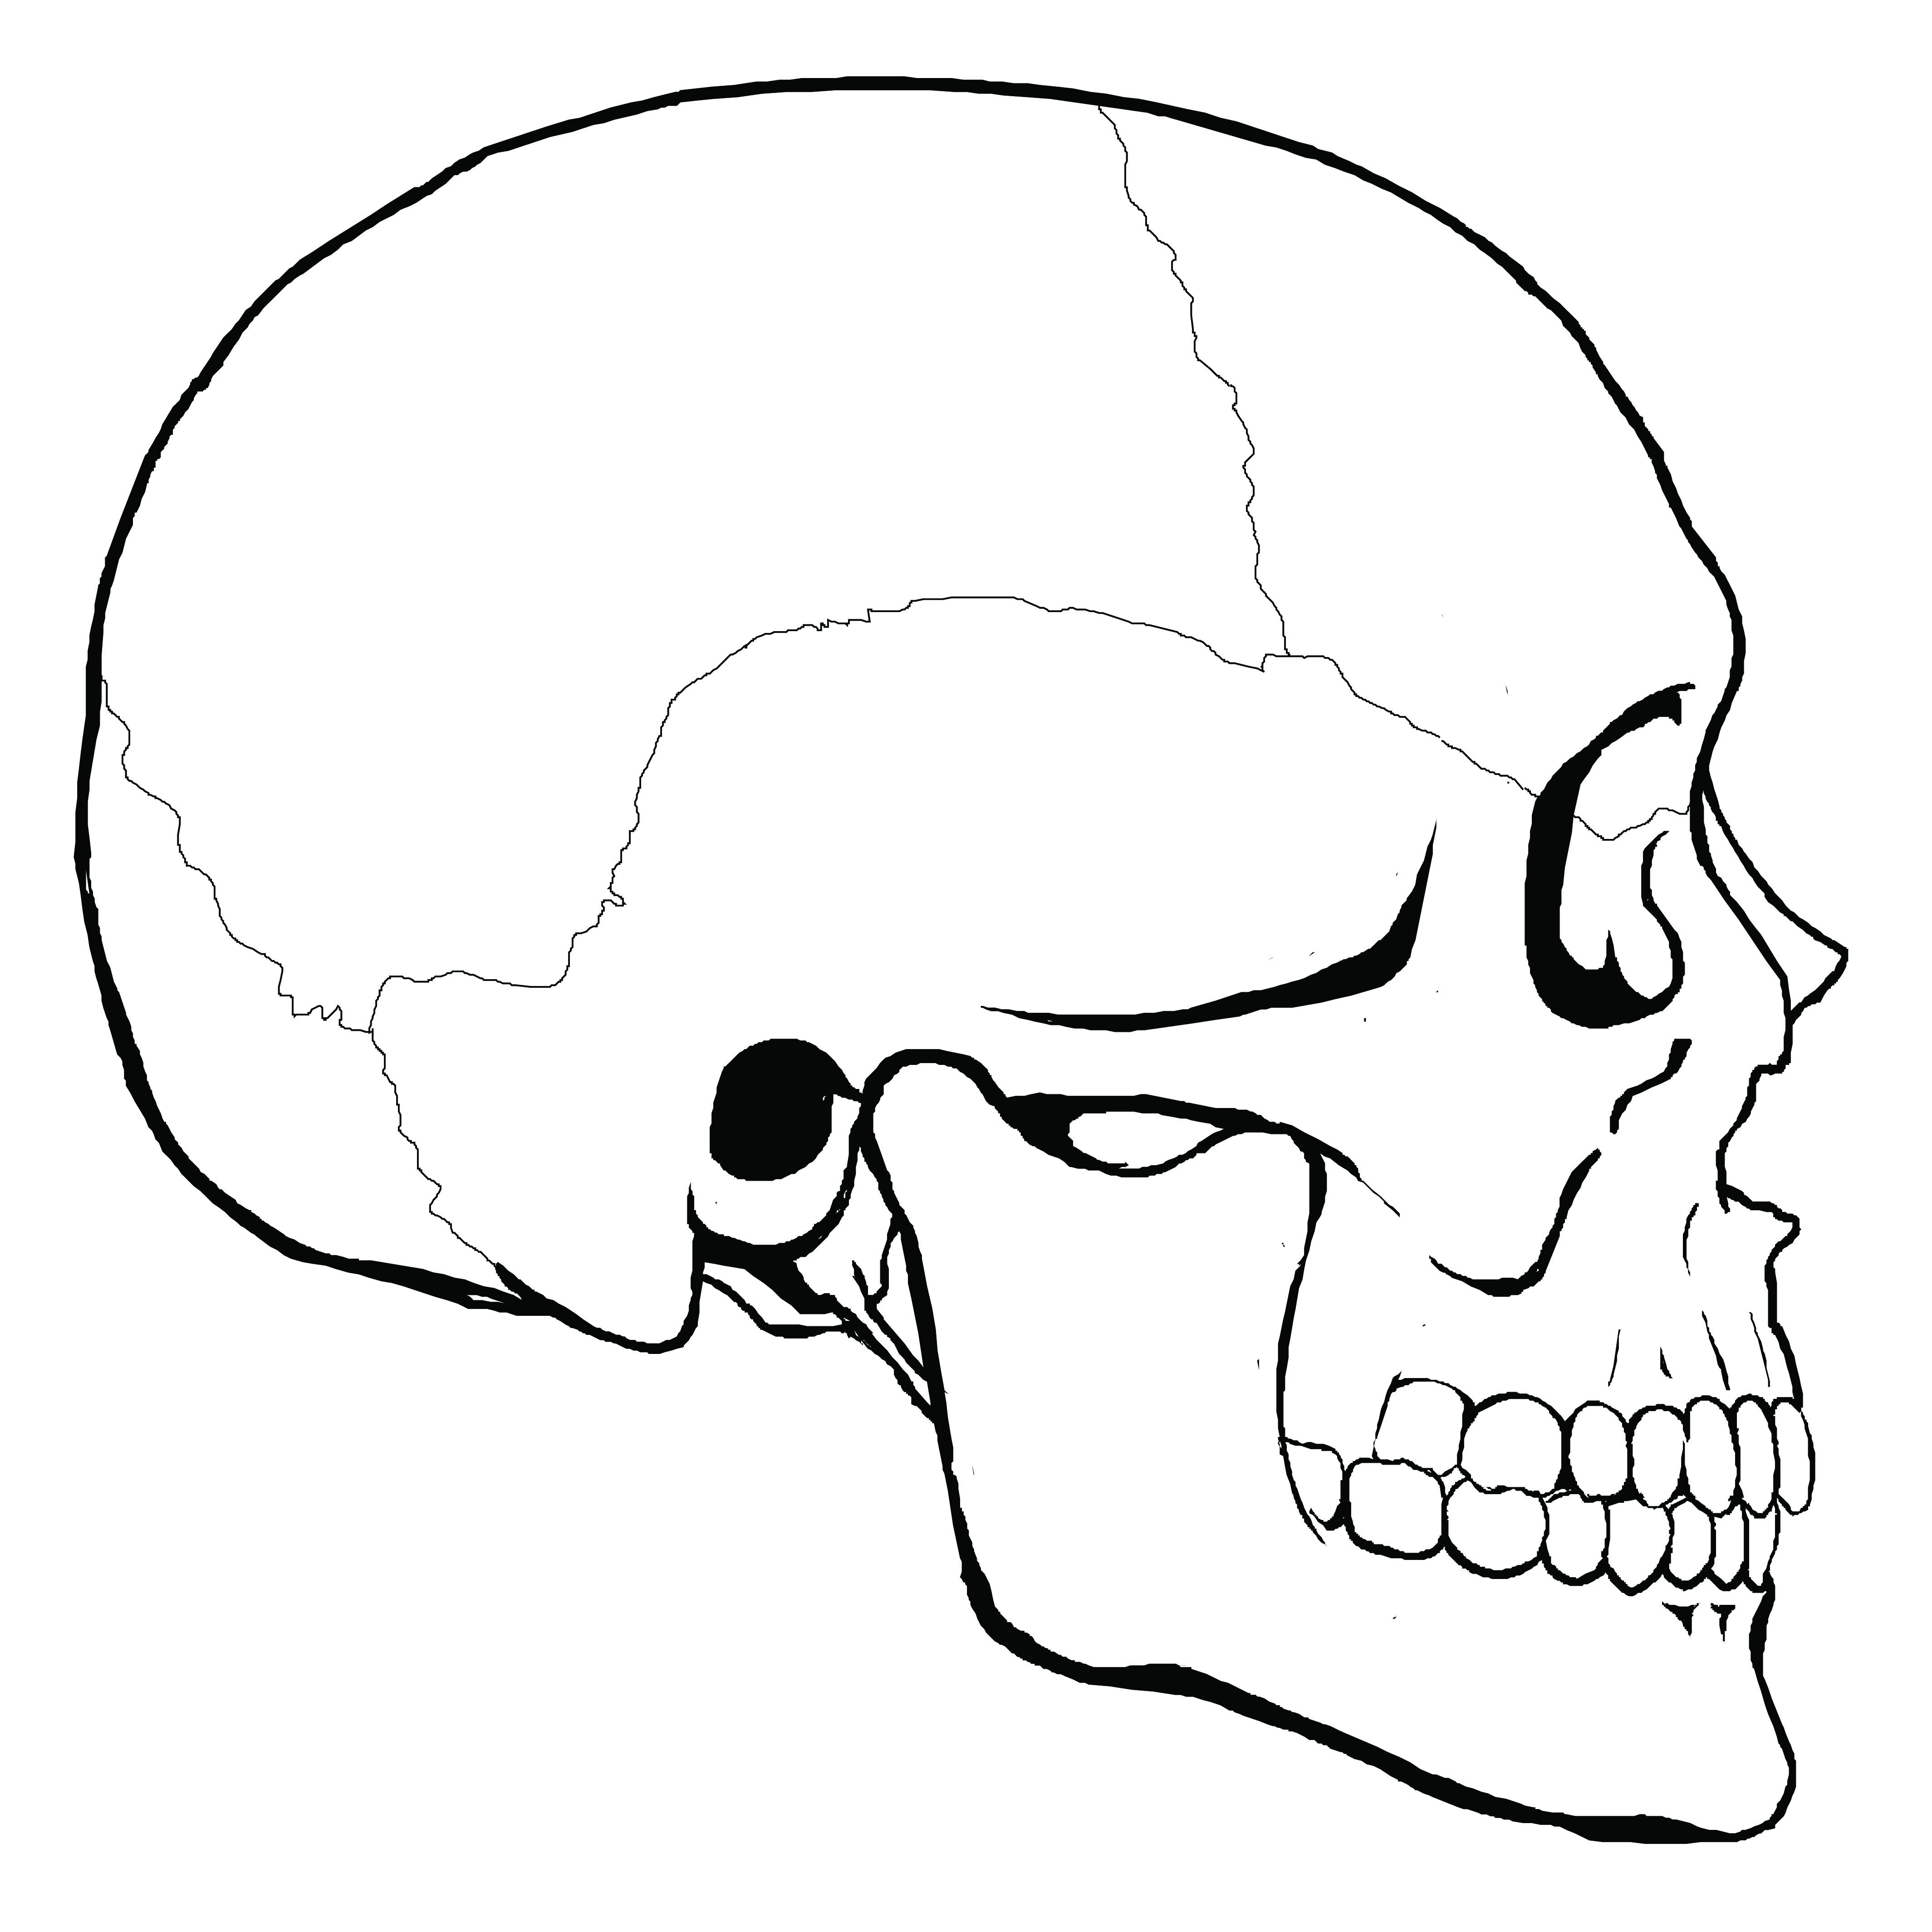 How To Draw A Human Skull Easy - Easy To Draw Skulls Step | Bodksawasusa